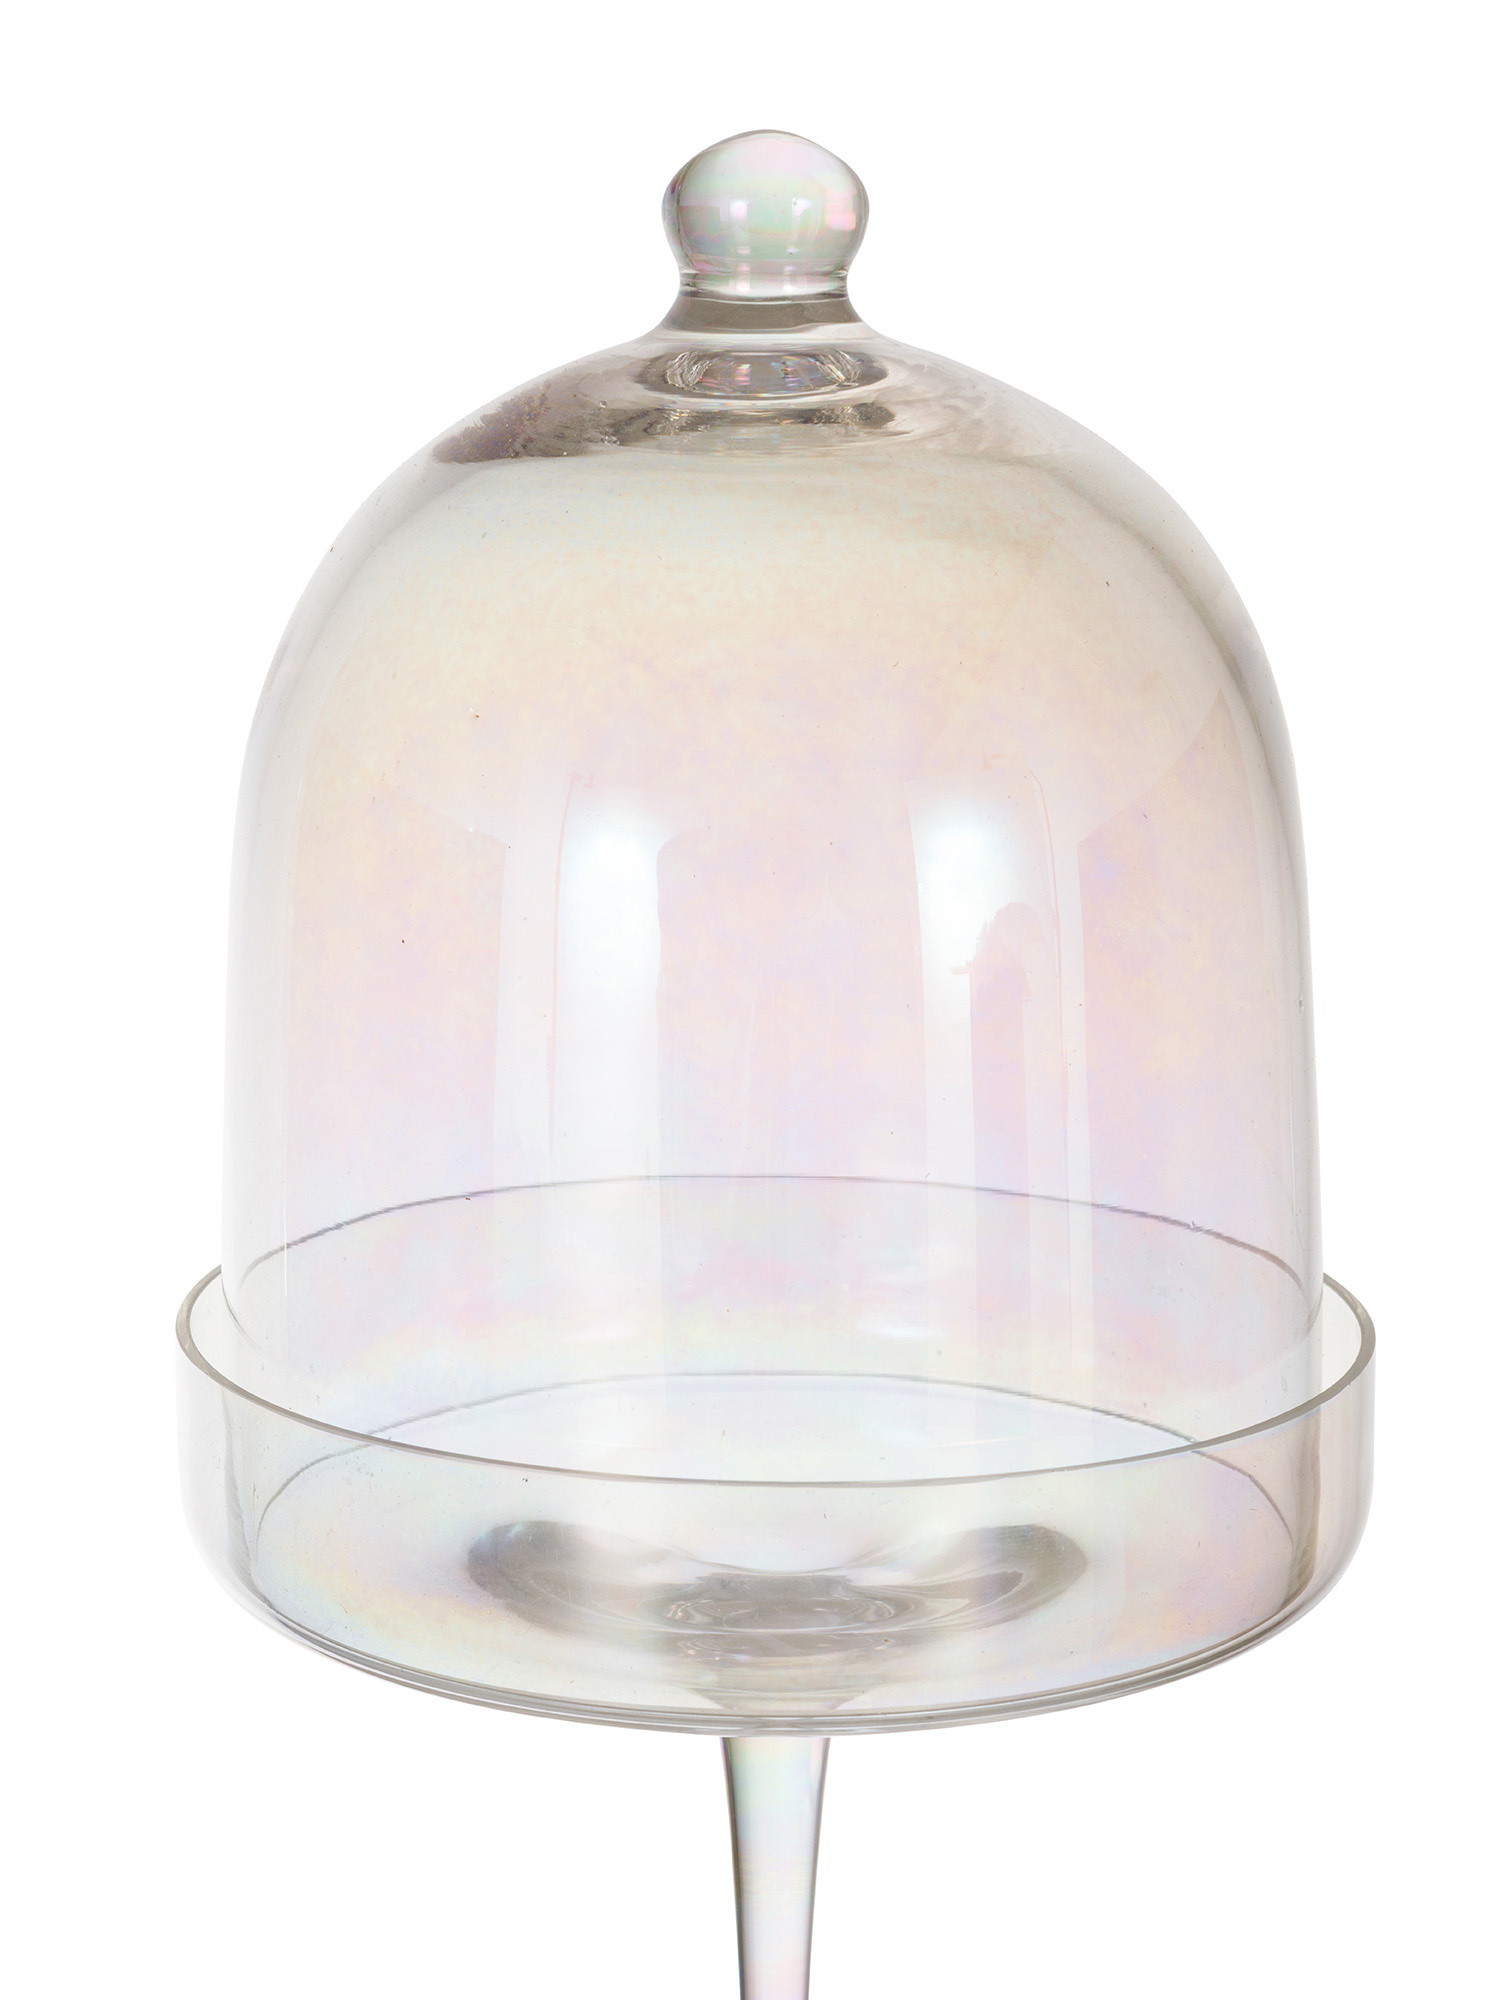 Stand with glass bell, Transparent, large image number 1